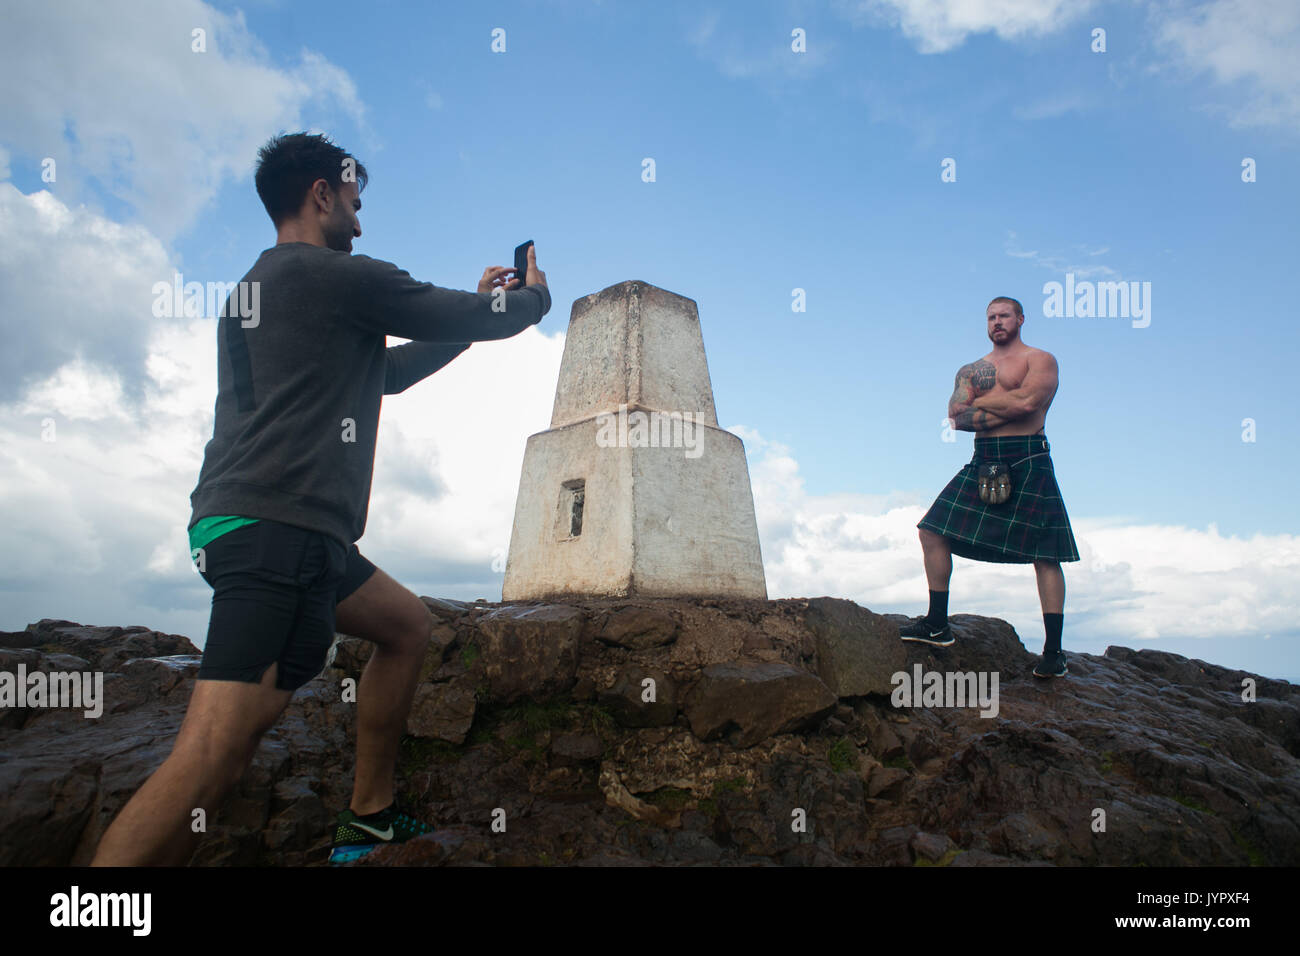 Photo-opportunity on the peak. A muscular topless man in a kilt is photographed by his friend on the top of the peak.  The peak of King Arthur's Seat  Stock Photo